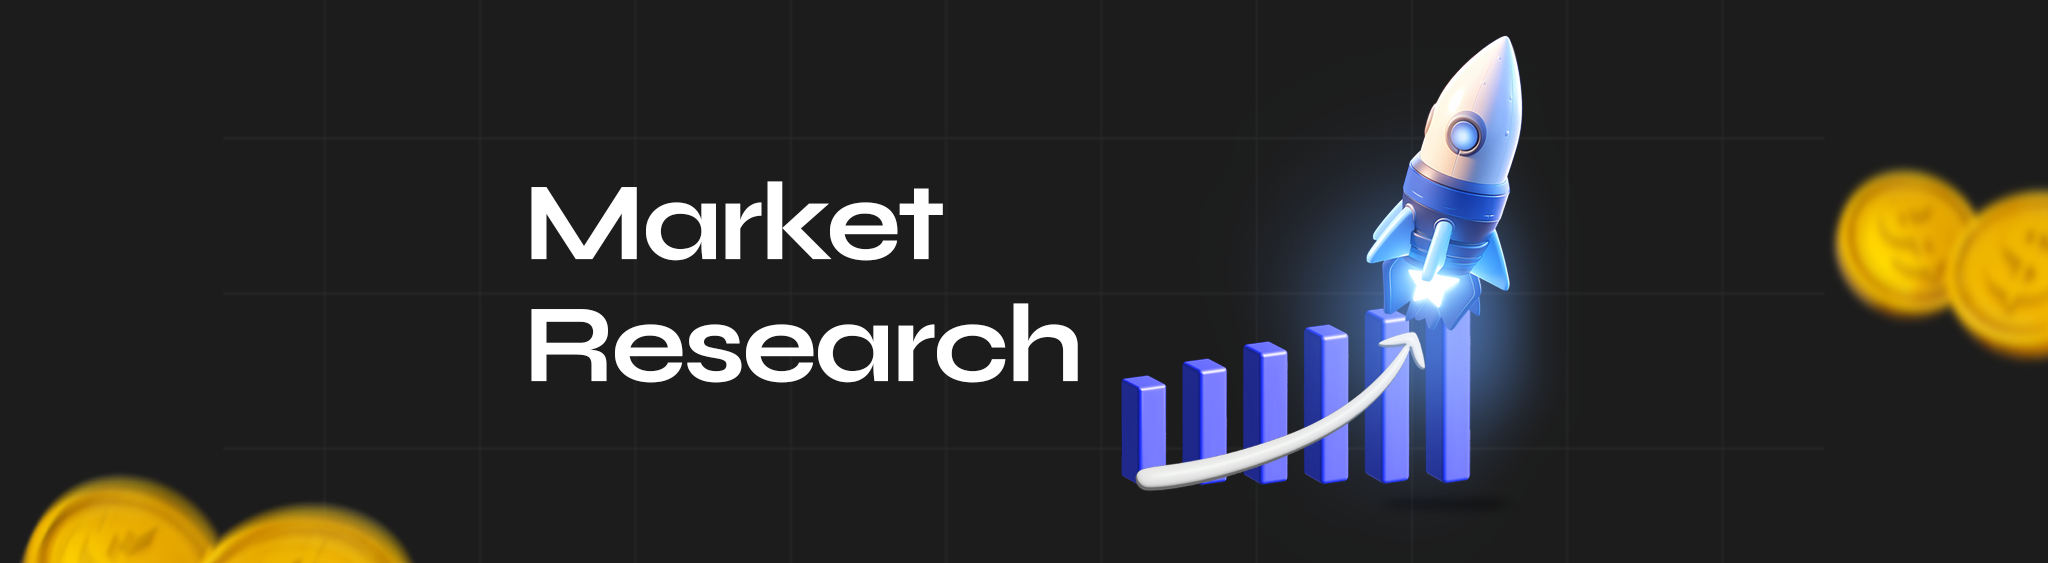 Unleash Potential with Market Research - Thinker Media